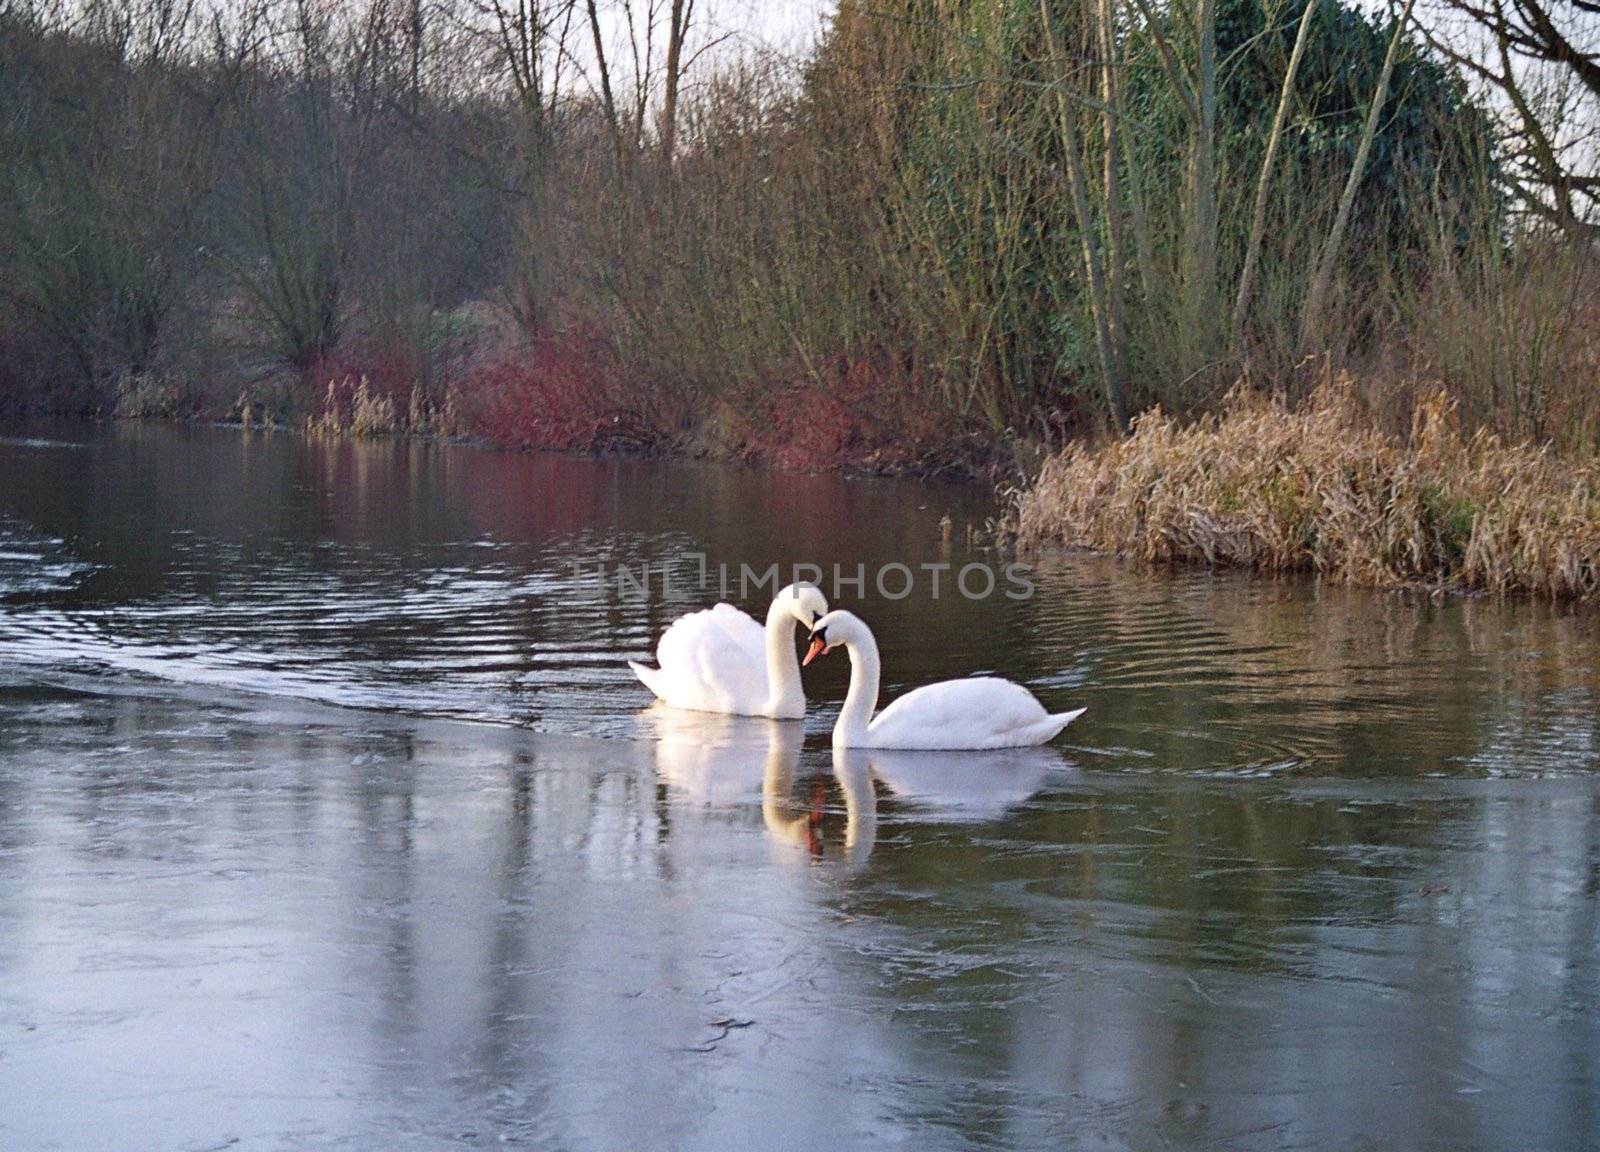 two swans bendingtheir heads together